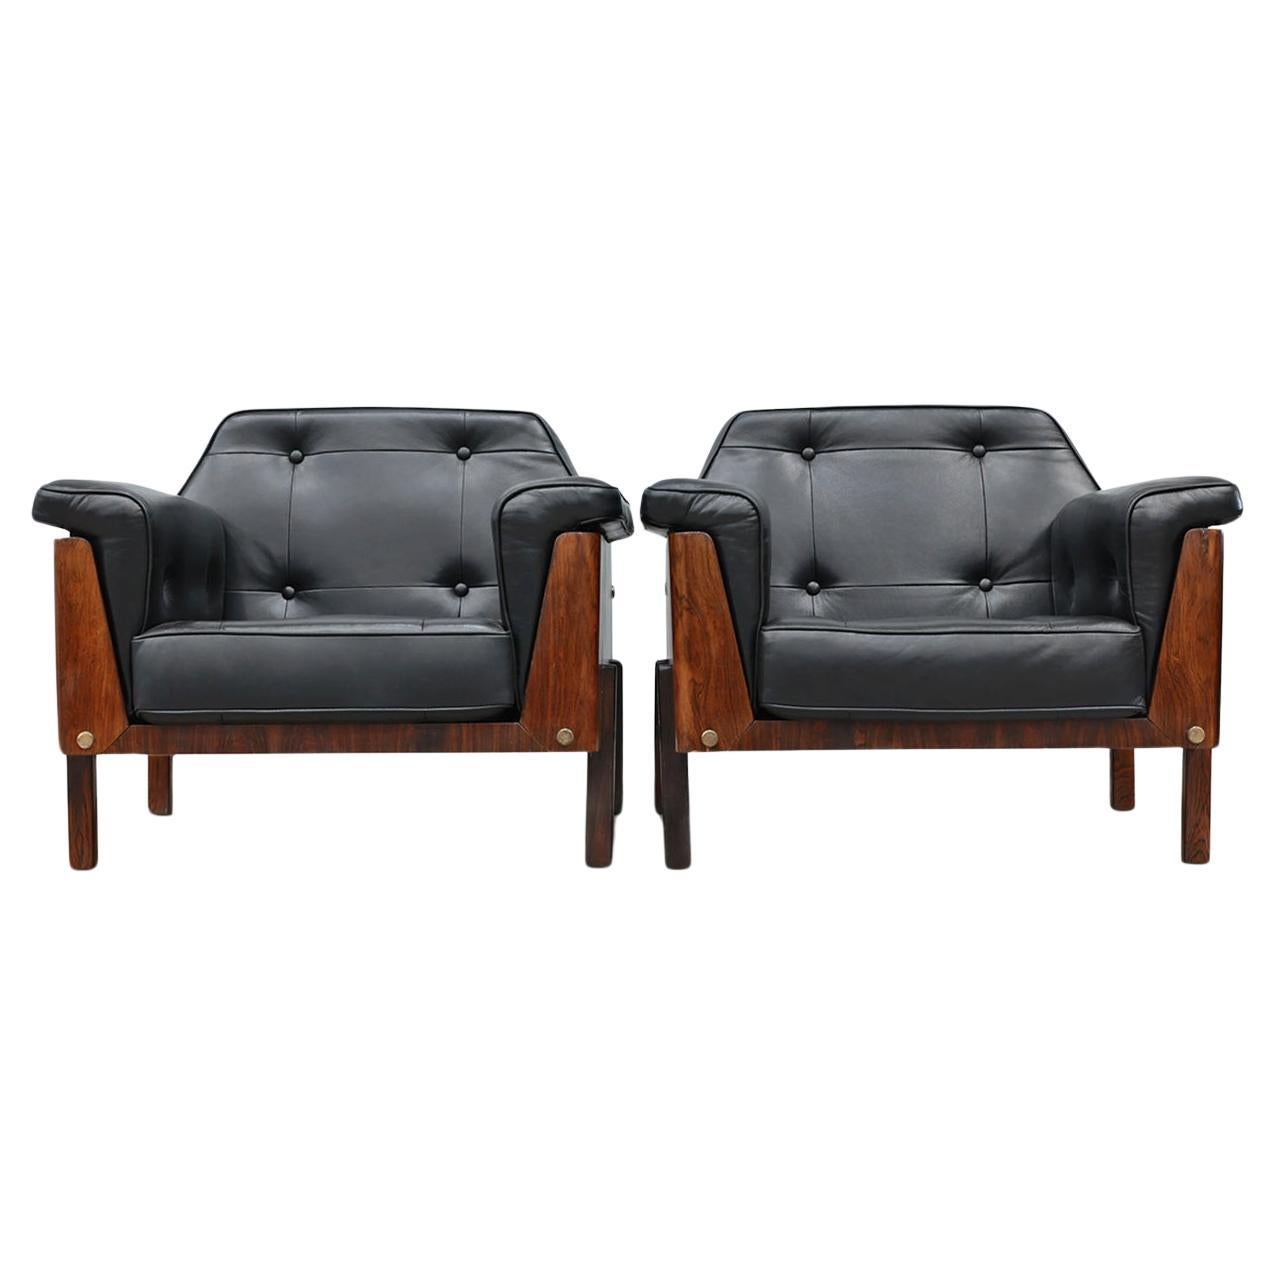 Mid-Century Modern Armchairs in Rosewood & Black Leather by Bertomeu, Brazil For Sale